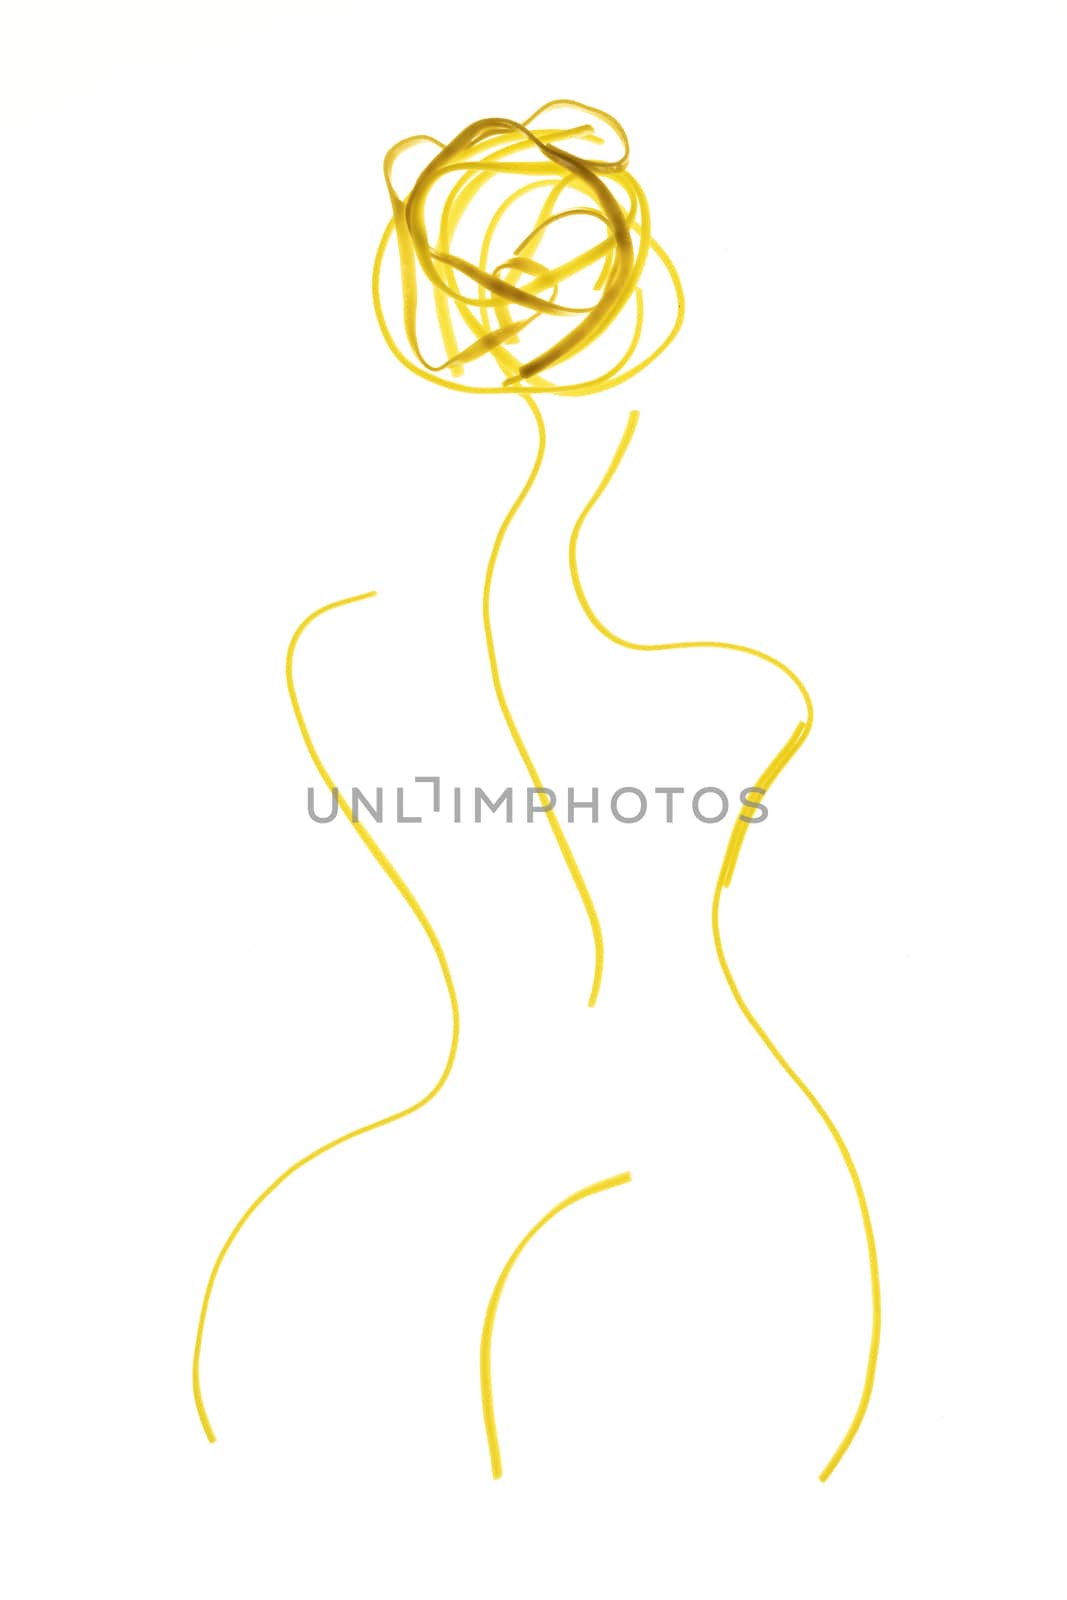 Swirls of cooked spaghetti. Spaghetti in the shape of a woman's body. by sashokddt